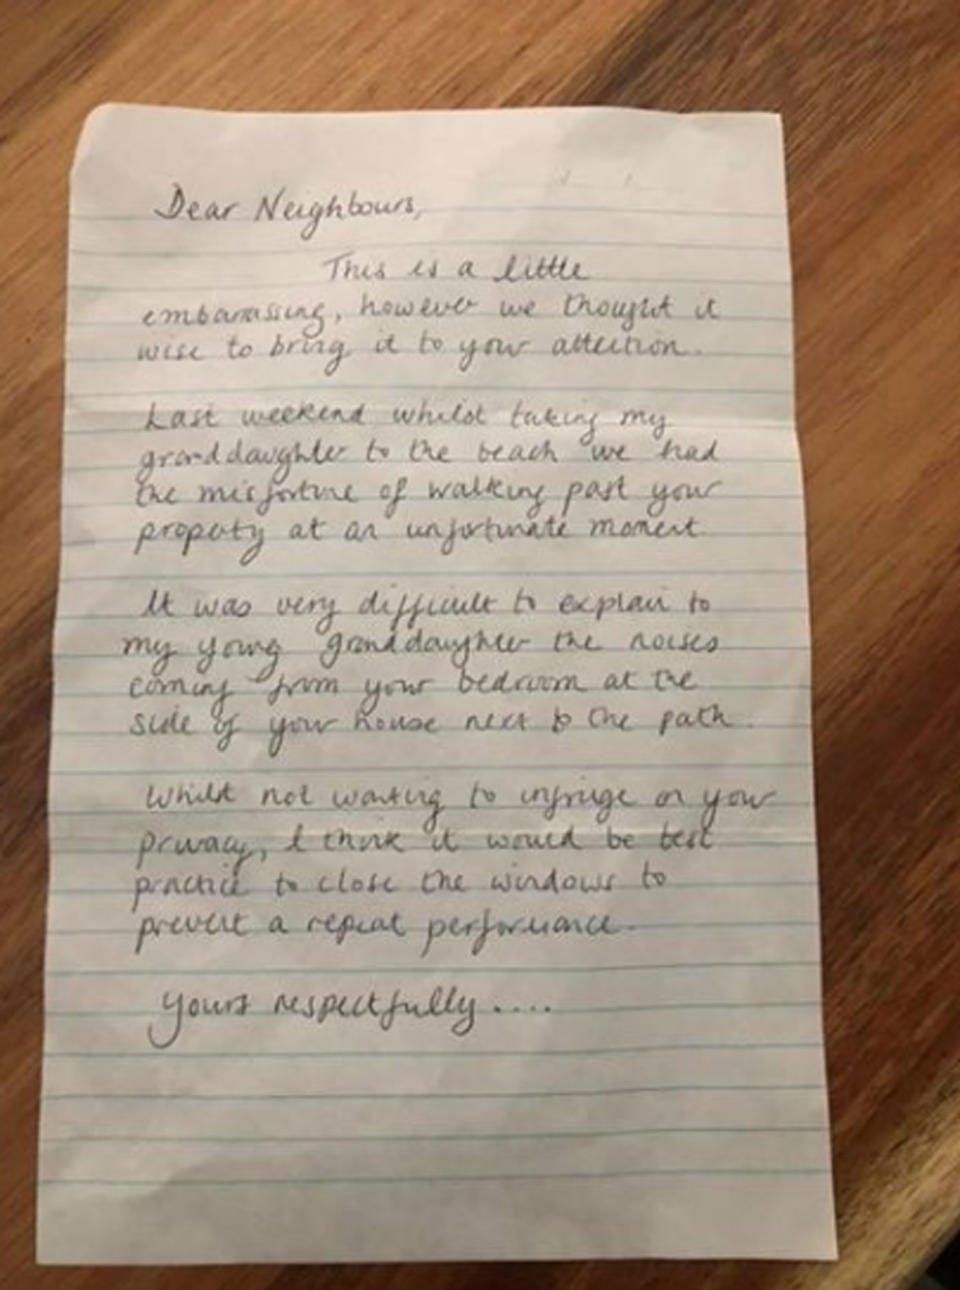 A Queensland homeowner has been left shocked after receiving a letter from a neighbour. Photo: Facebook